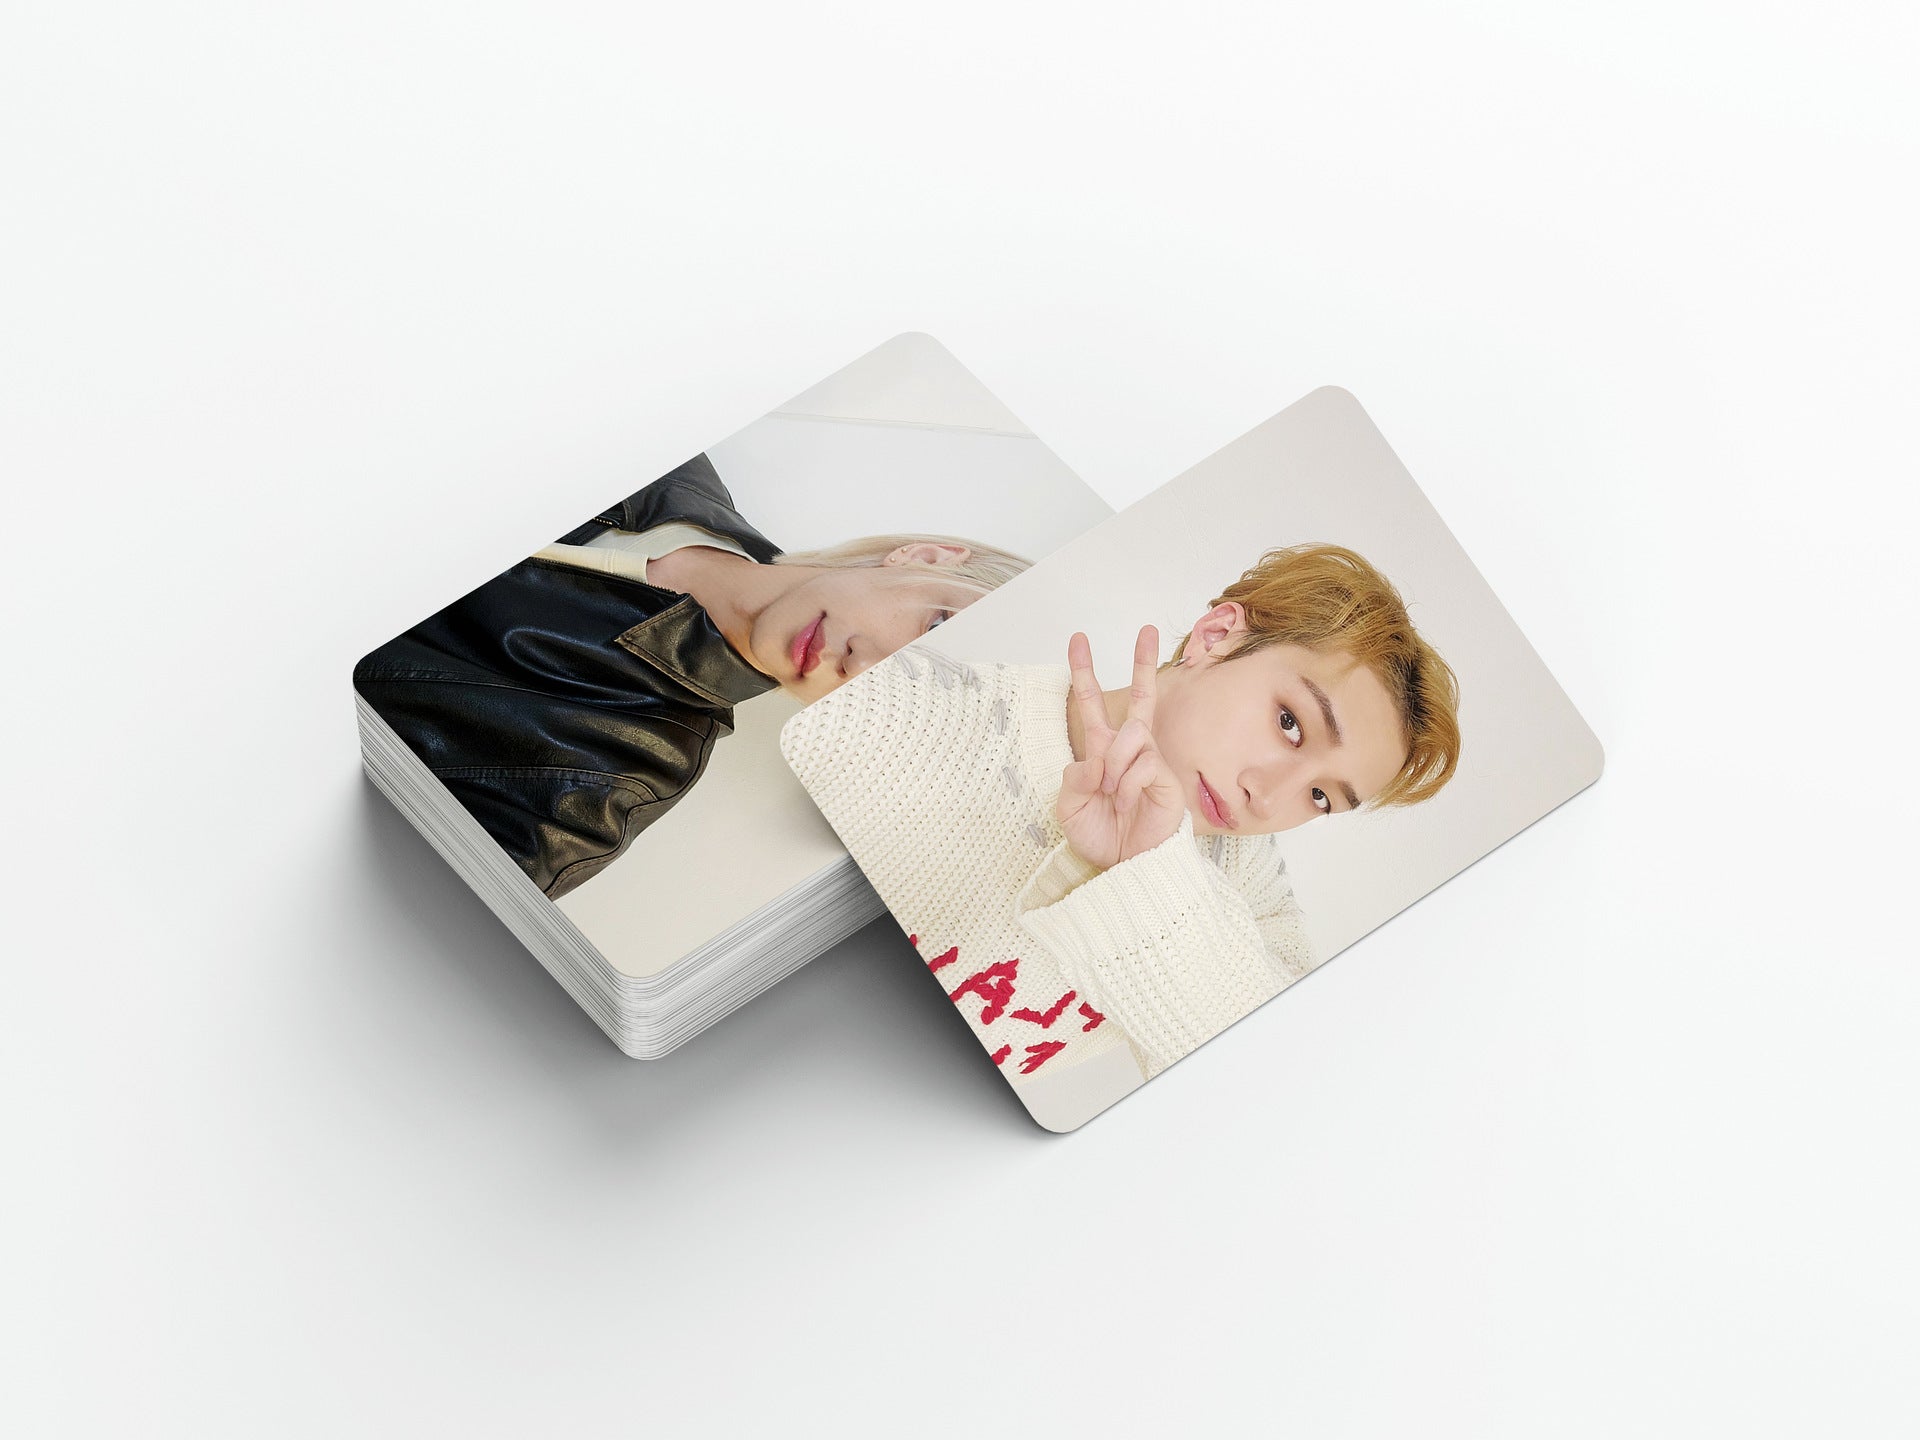 SKZ Christmas POP-UP Store 2023 Photocard Exclusive Edition